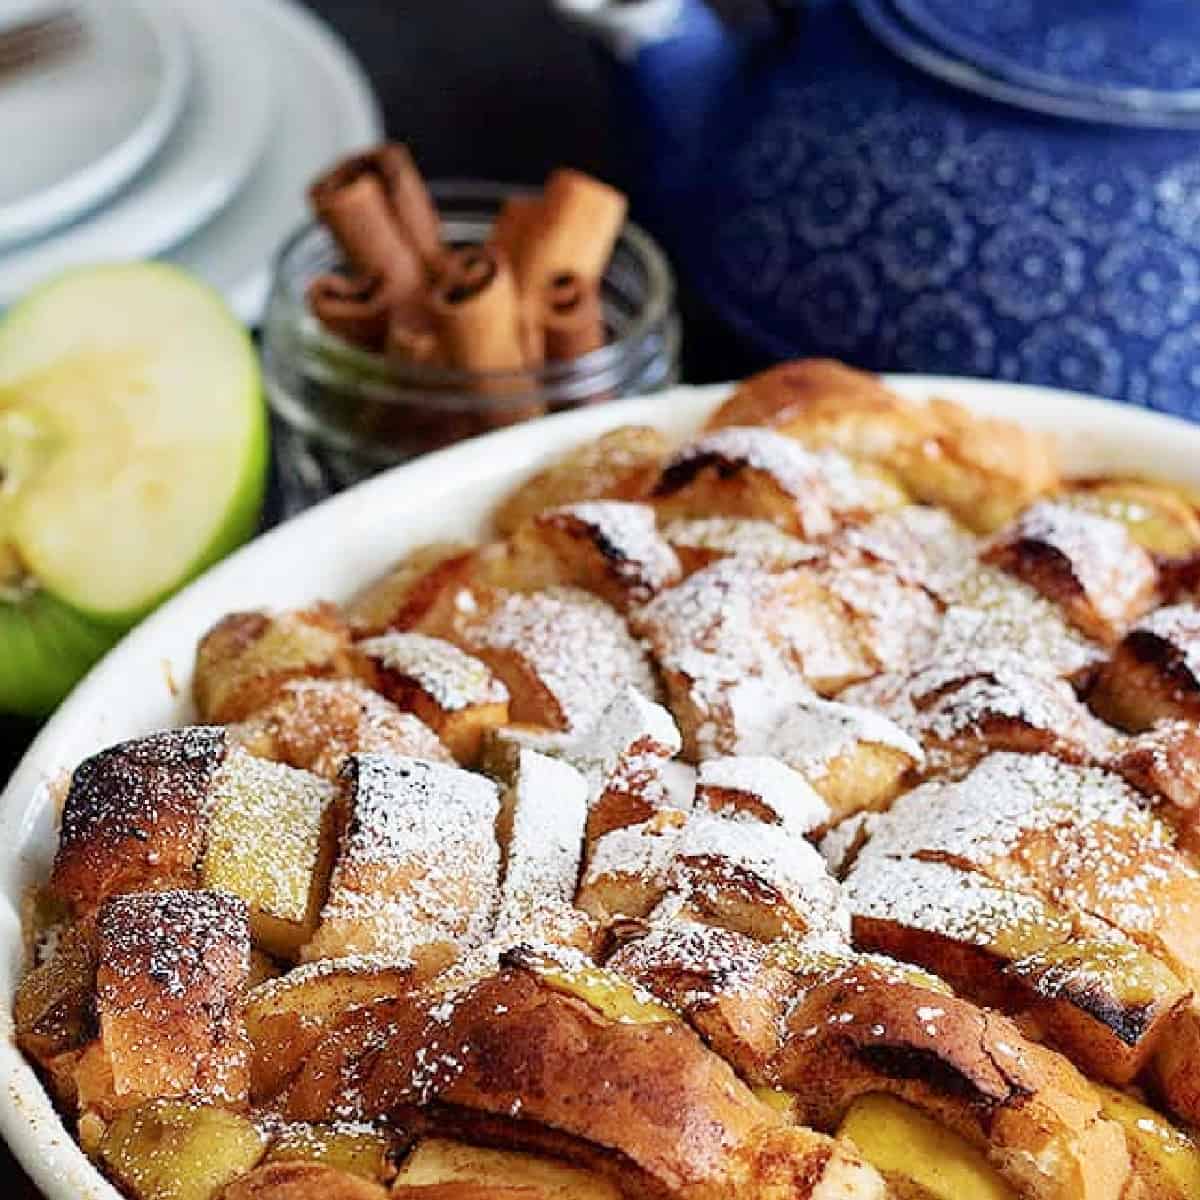 Make your mornings bright and tasty with this Apple Cinnamon French Toast Bake that is full of fall flavors. It has the flavors of an apple pie with the texture of French toast!
